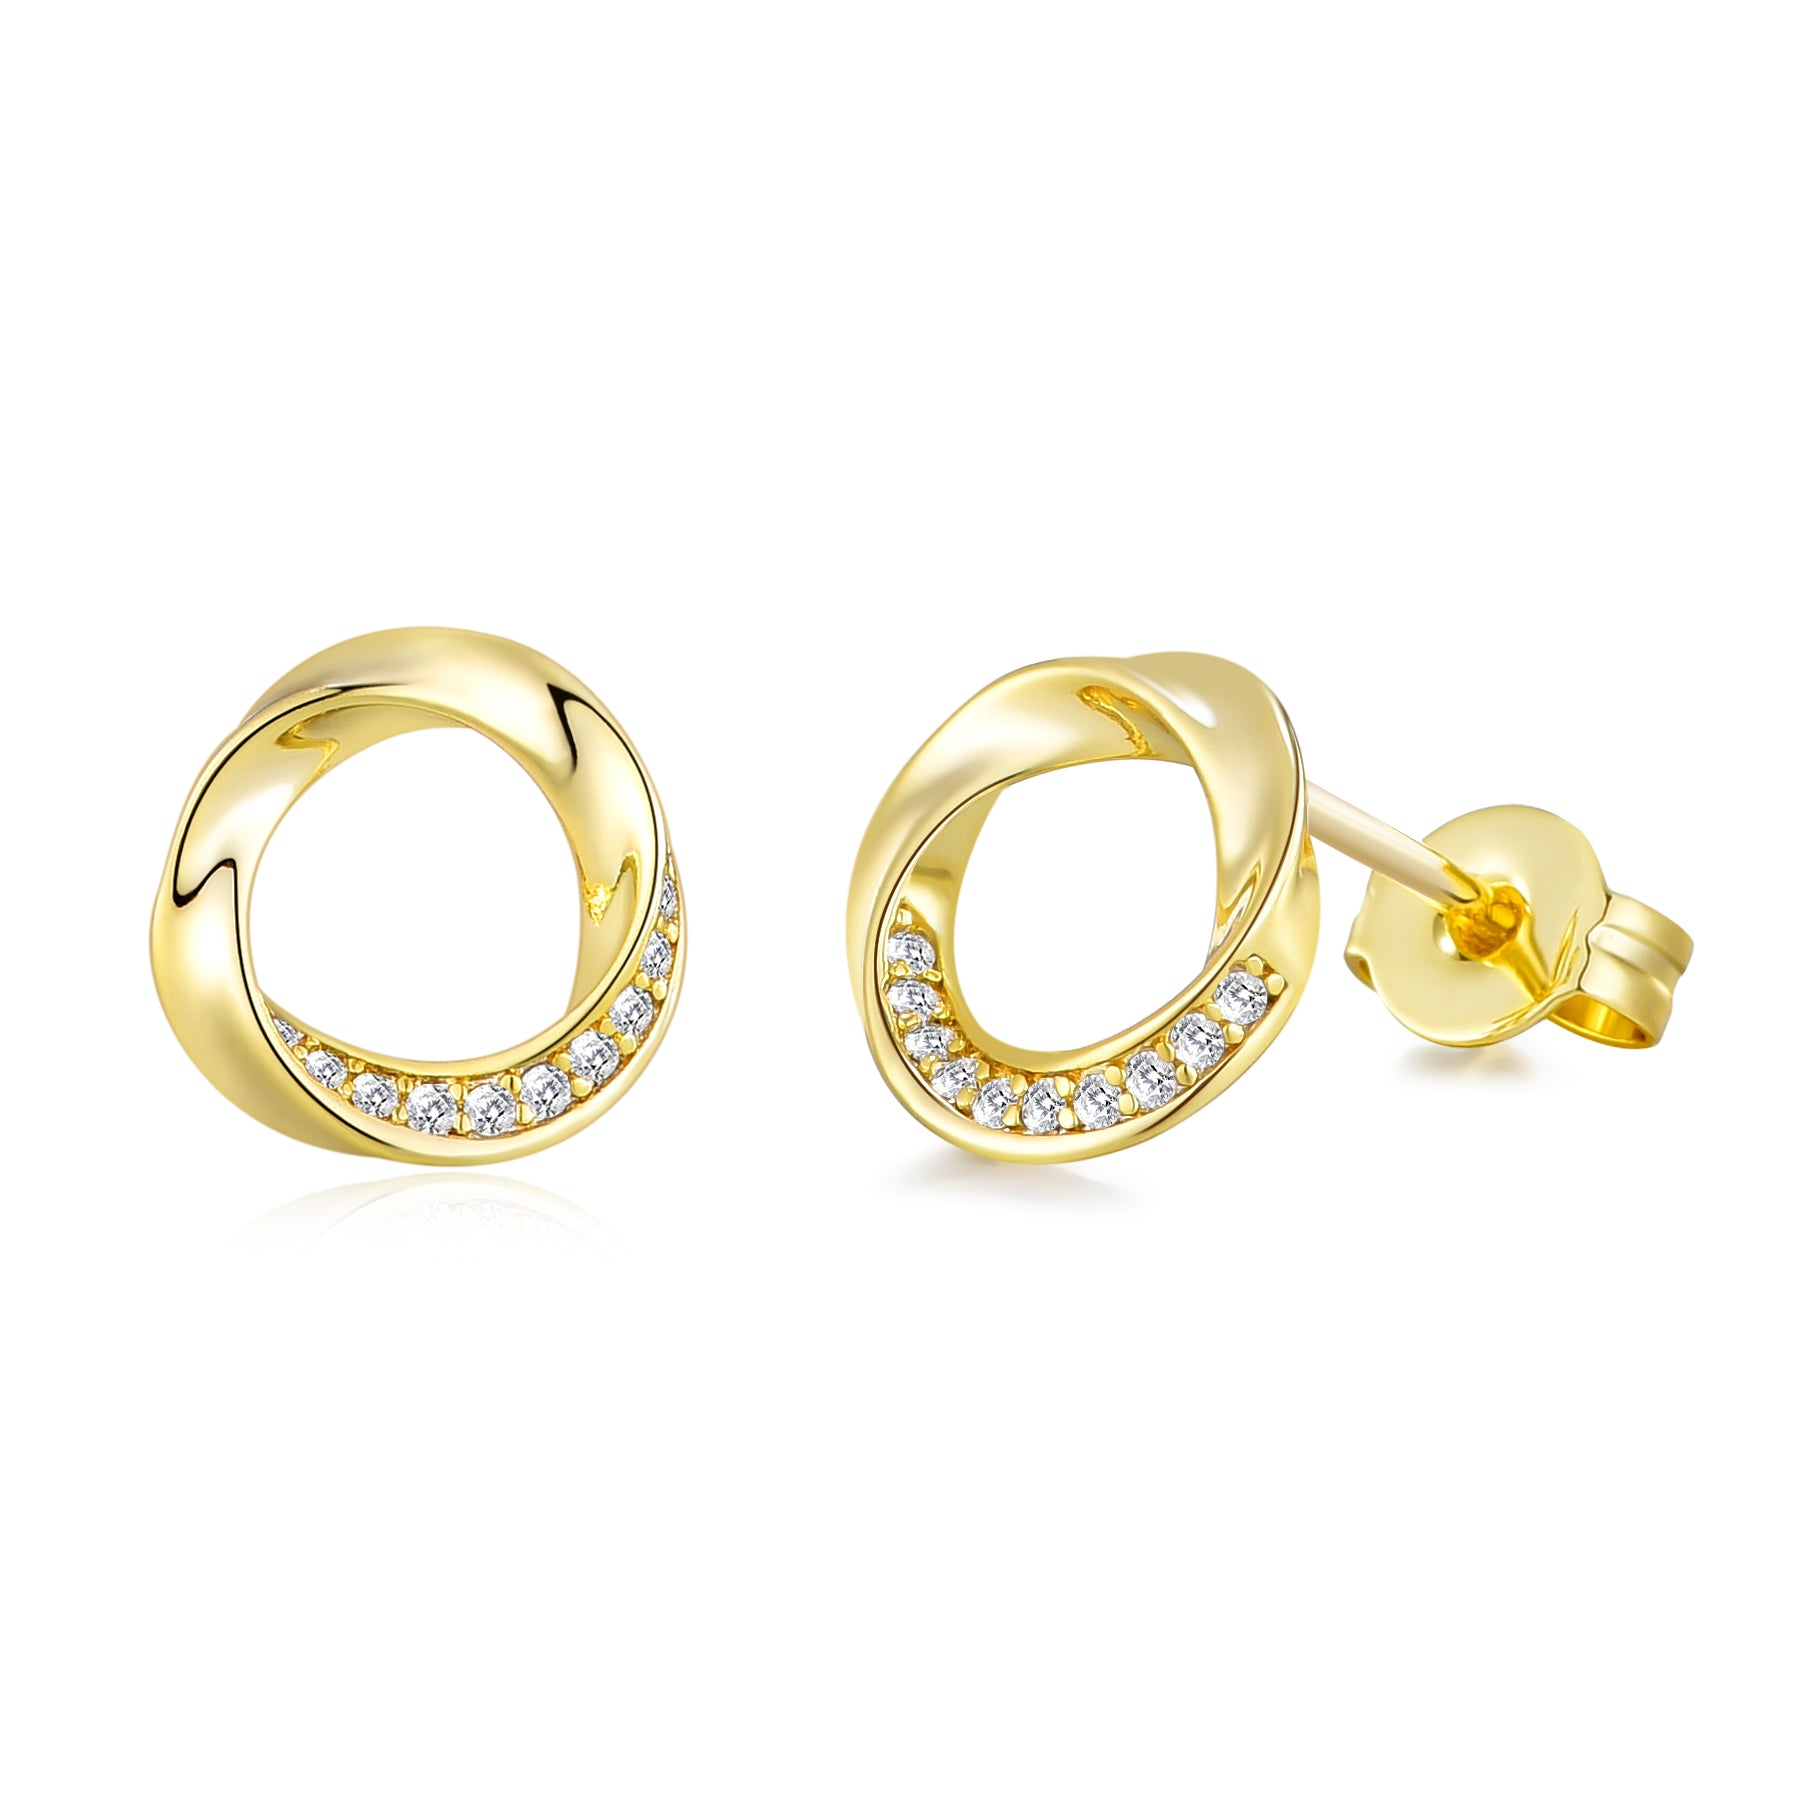 Gold Plated Circle Twist Earrings Created with Zircondia® Crystals by Philip Jones Jewellery